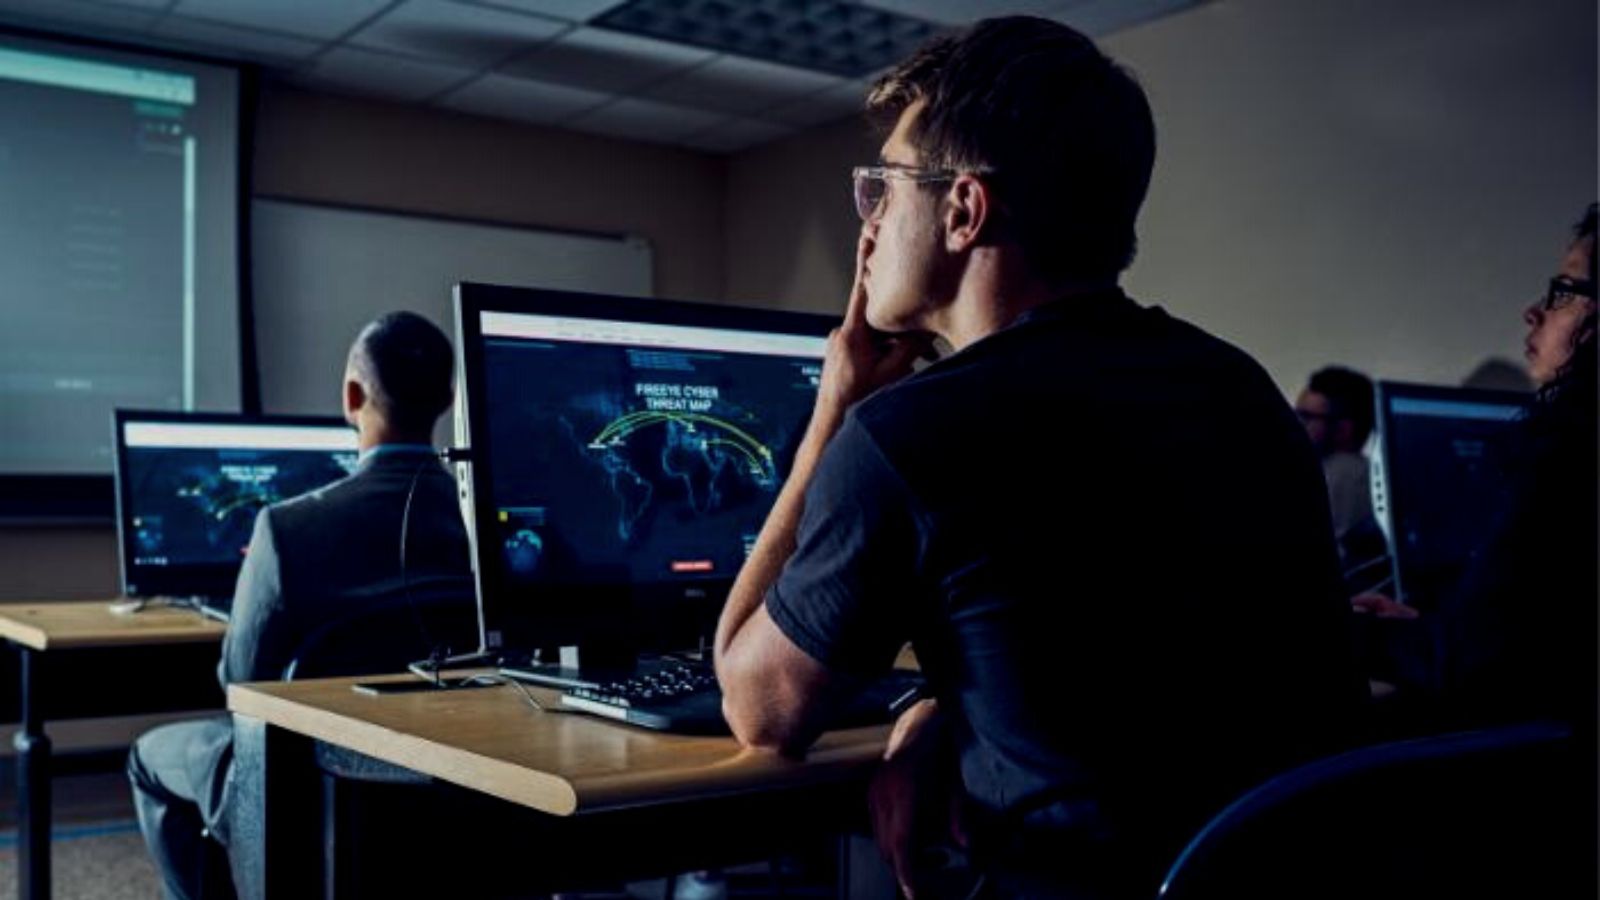 Students in a Cybersecurity Classroom